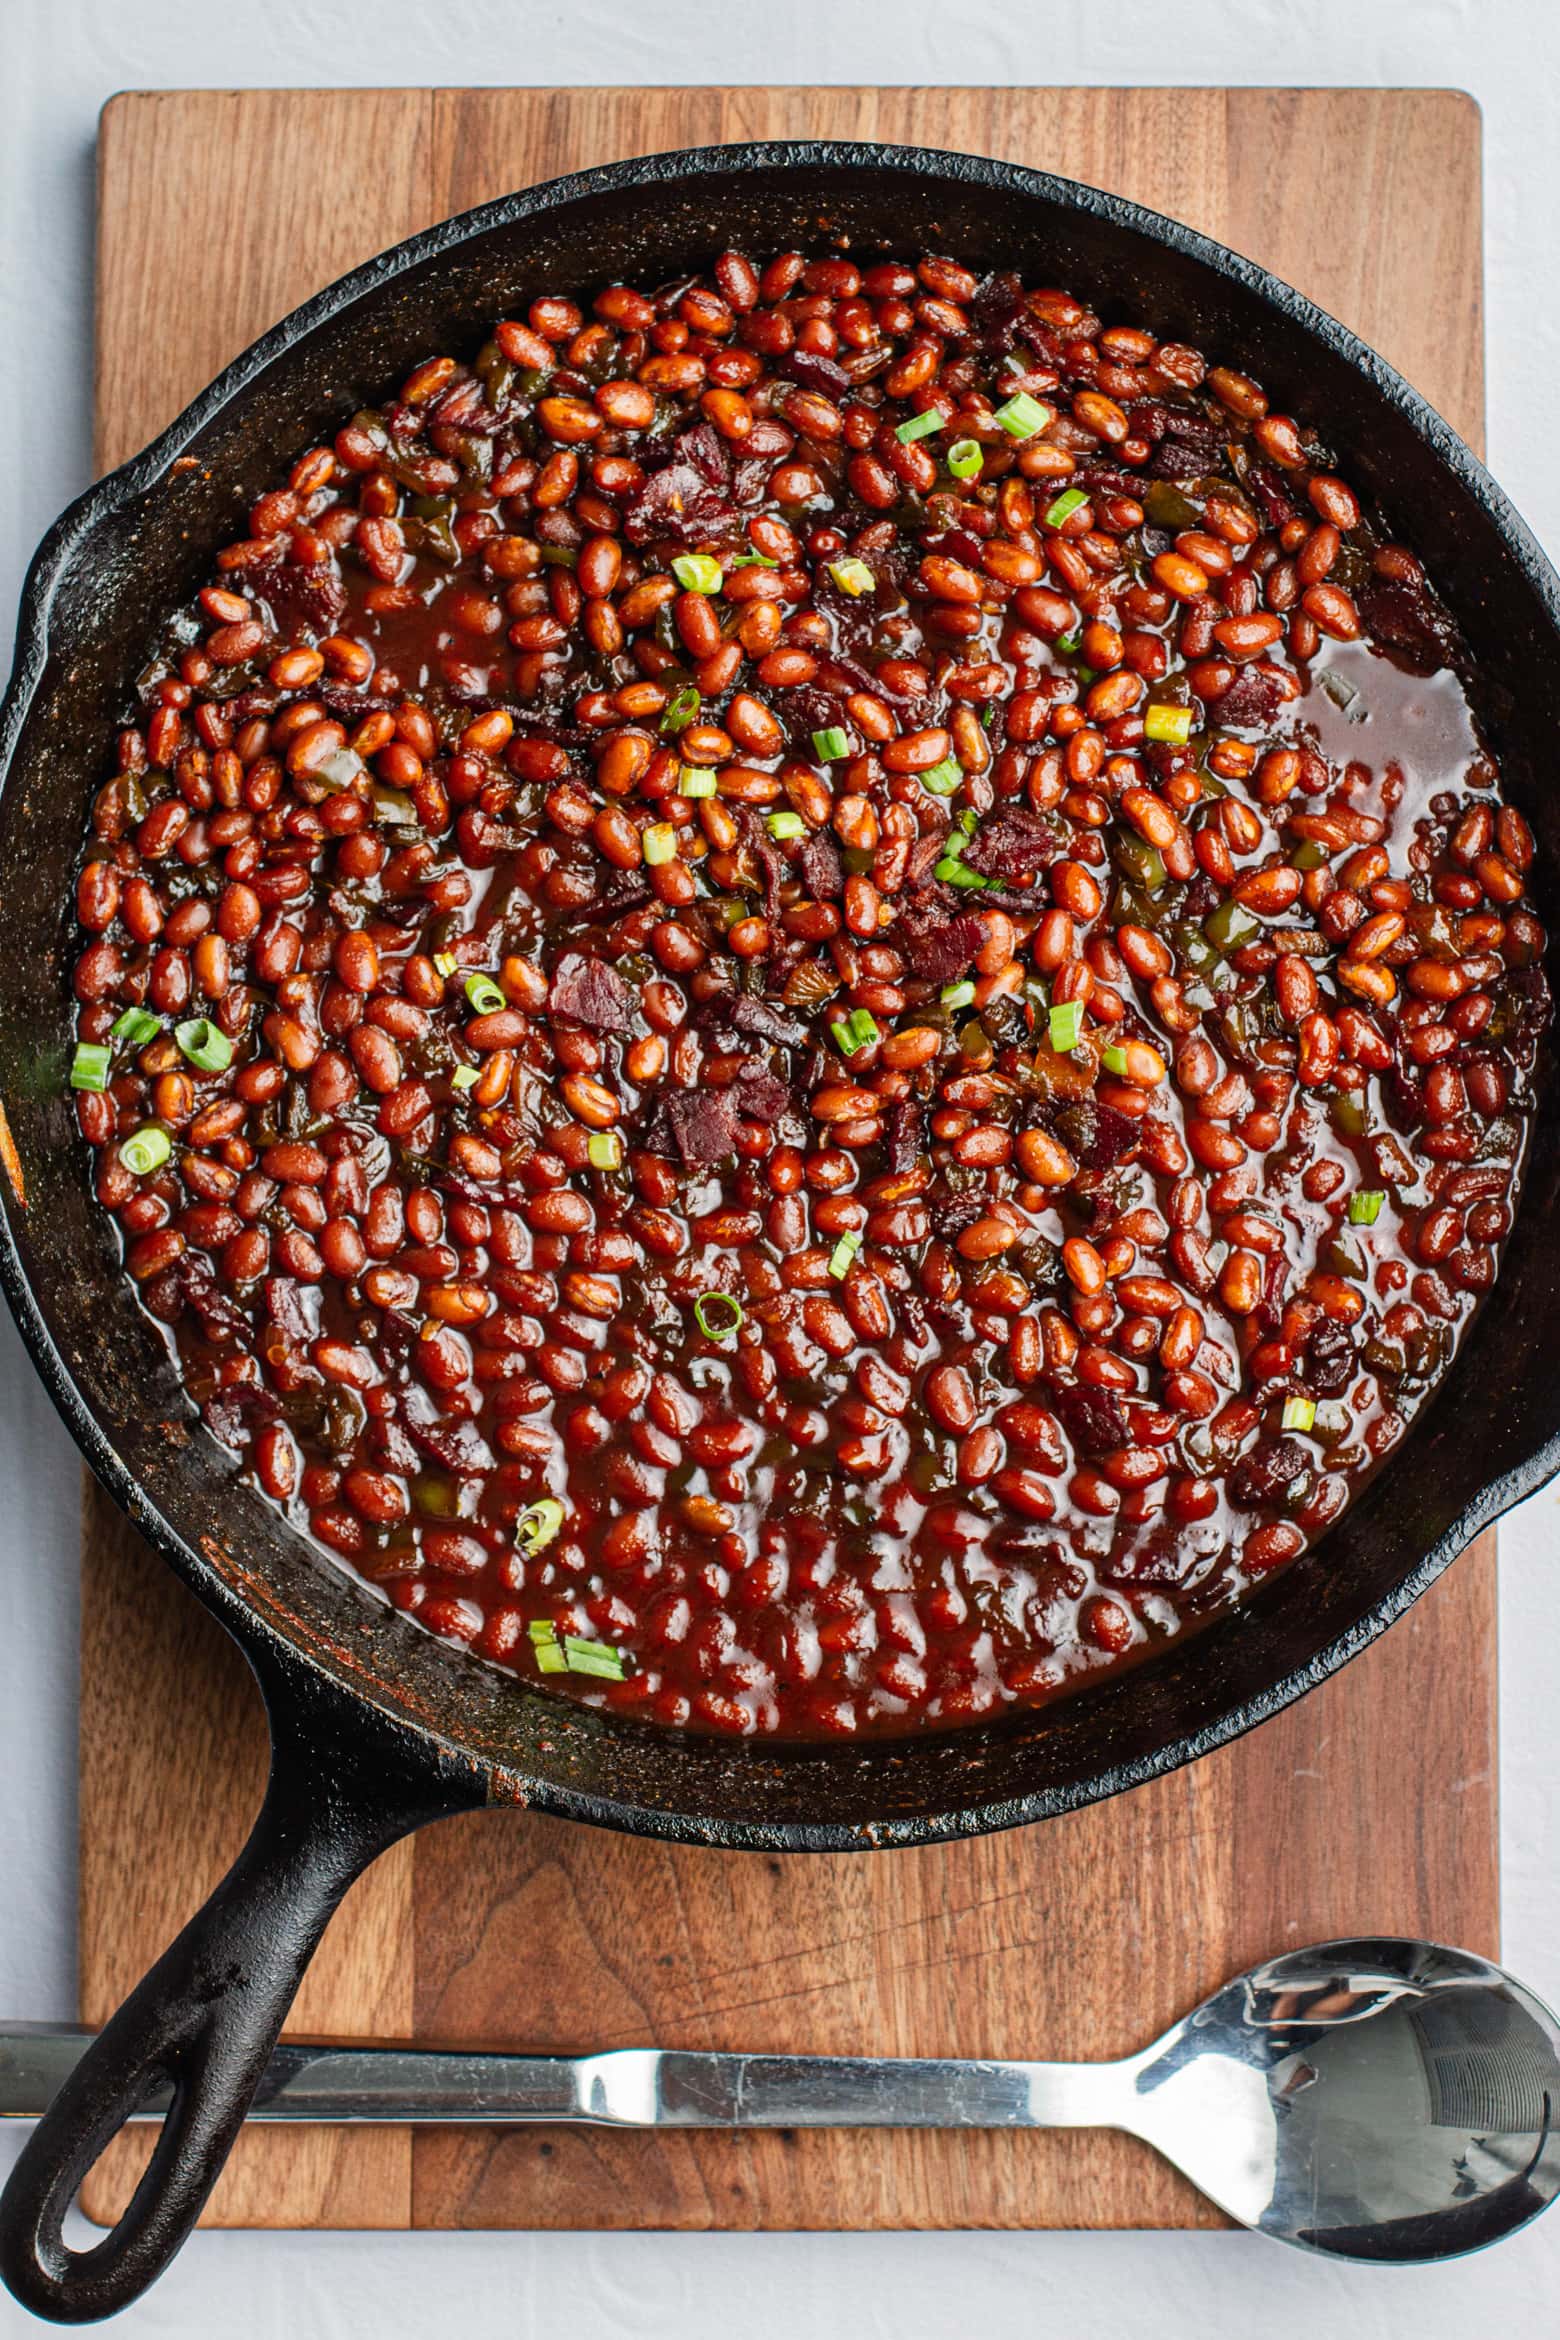 Southern brown sugar baked beans in a cast iron pan on a wooden cutting board with a spoon